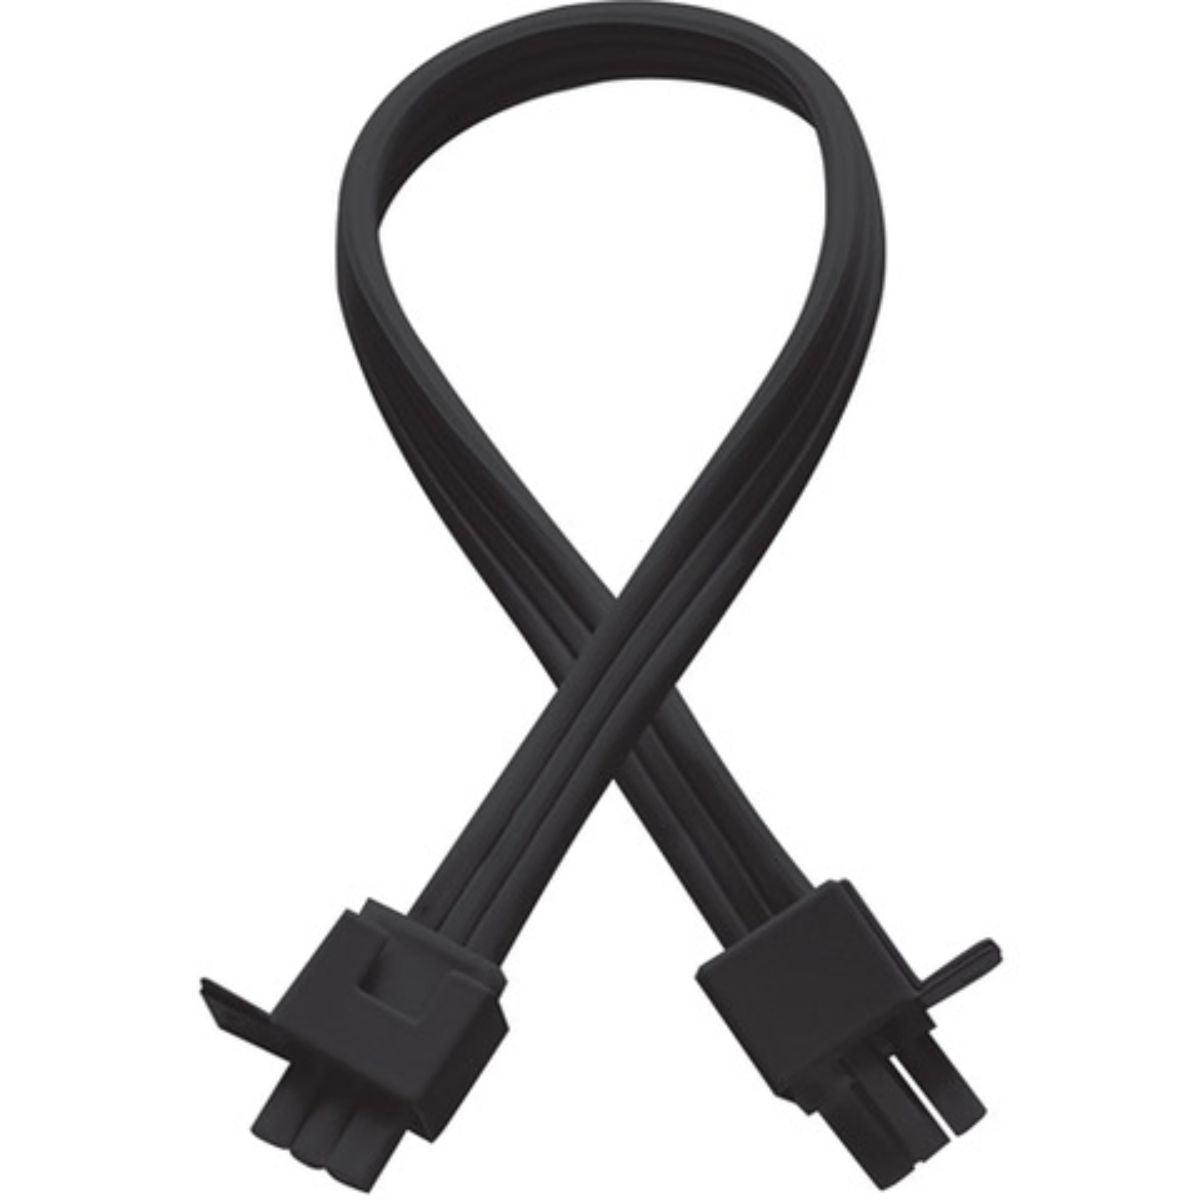 12in. Interconnect Cable For Undercabinet Lights, Black Finish - Bees Lighting